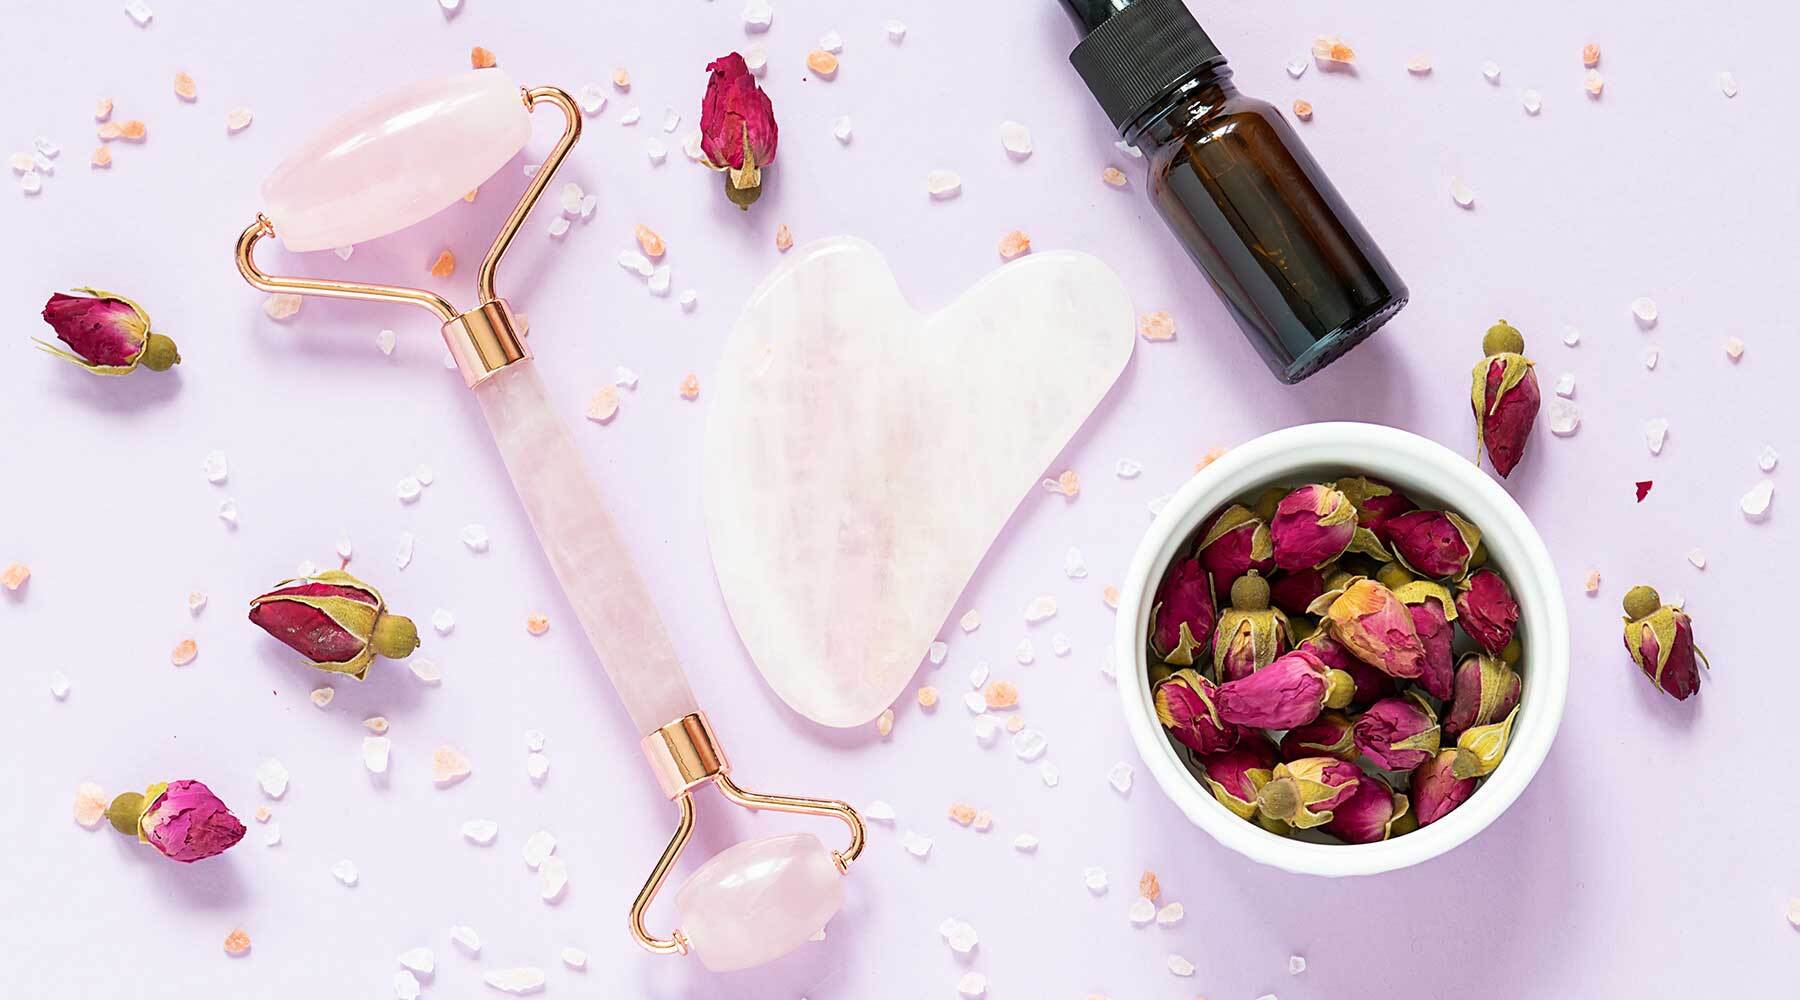 8 Skincare Benefits of Gua Sha You Can Look Forward To